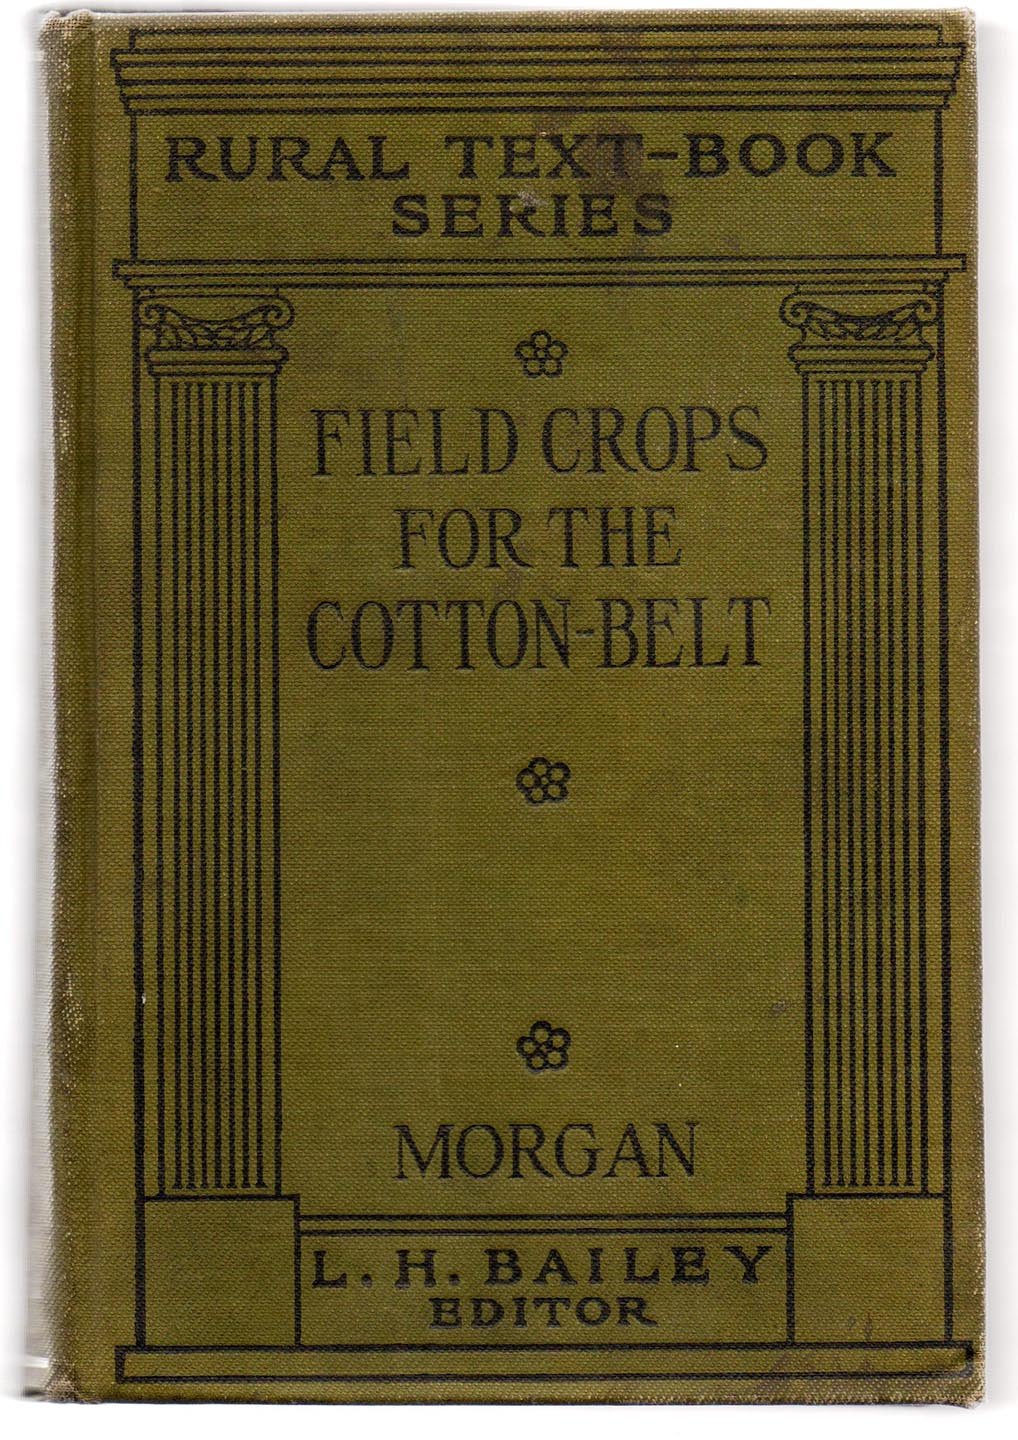 Field Crops For the Cotton-Belt